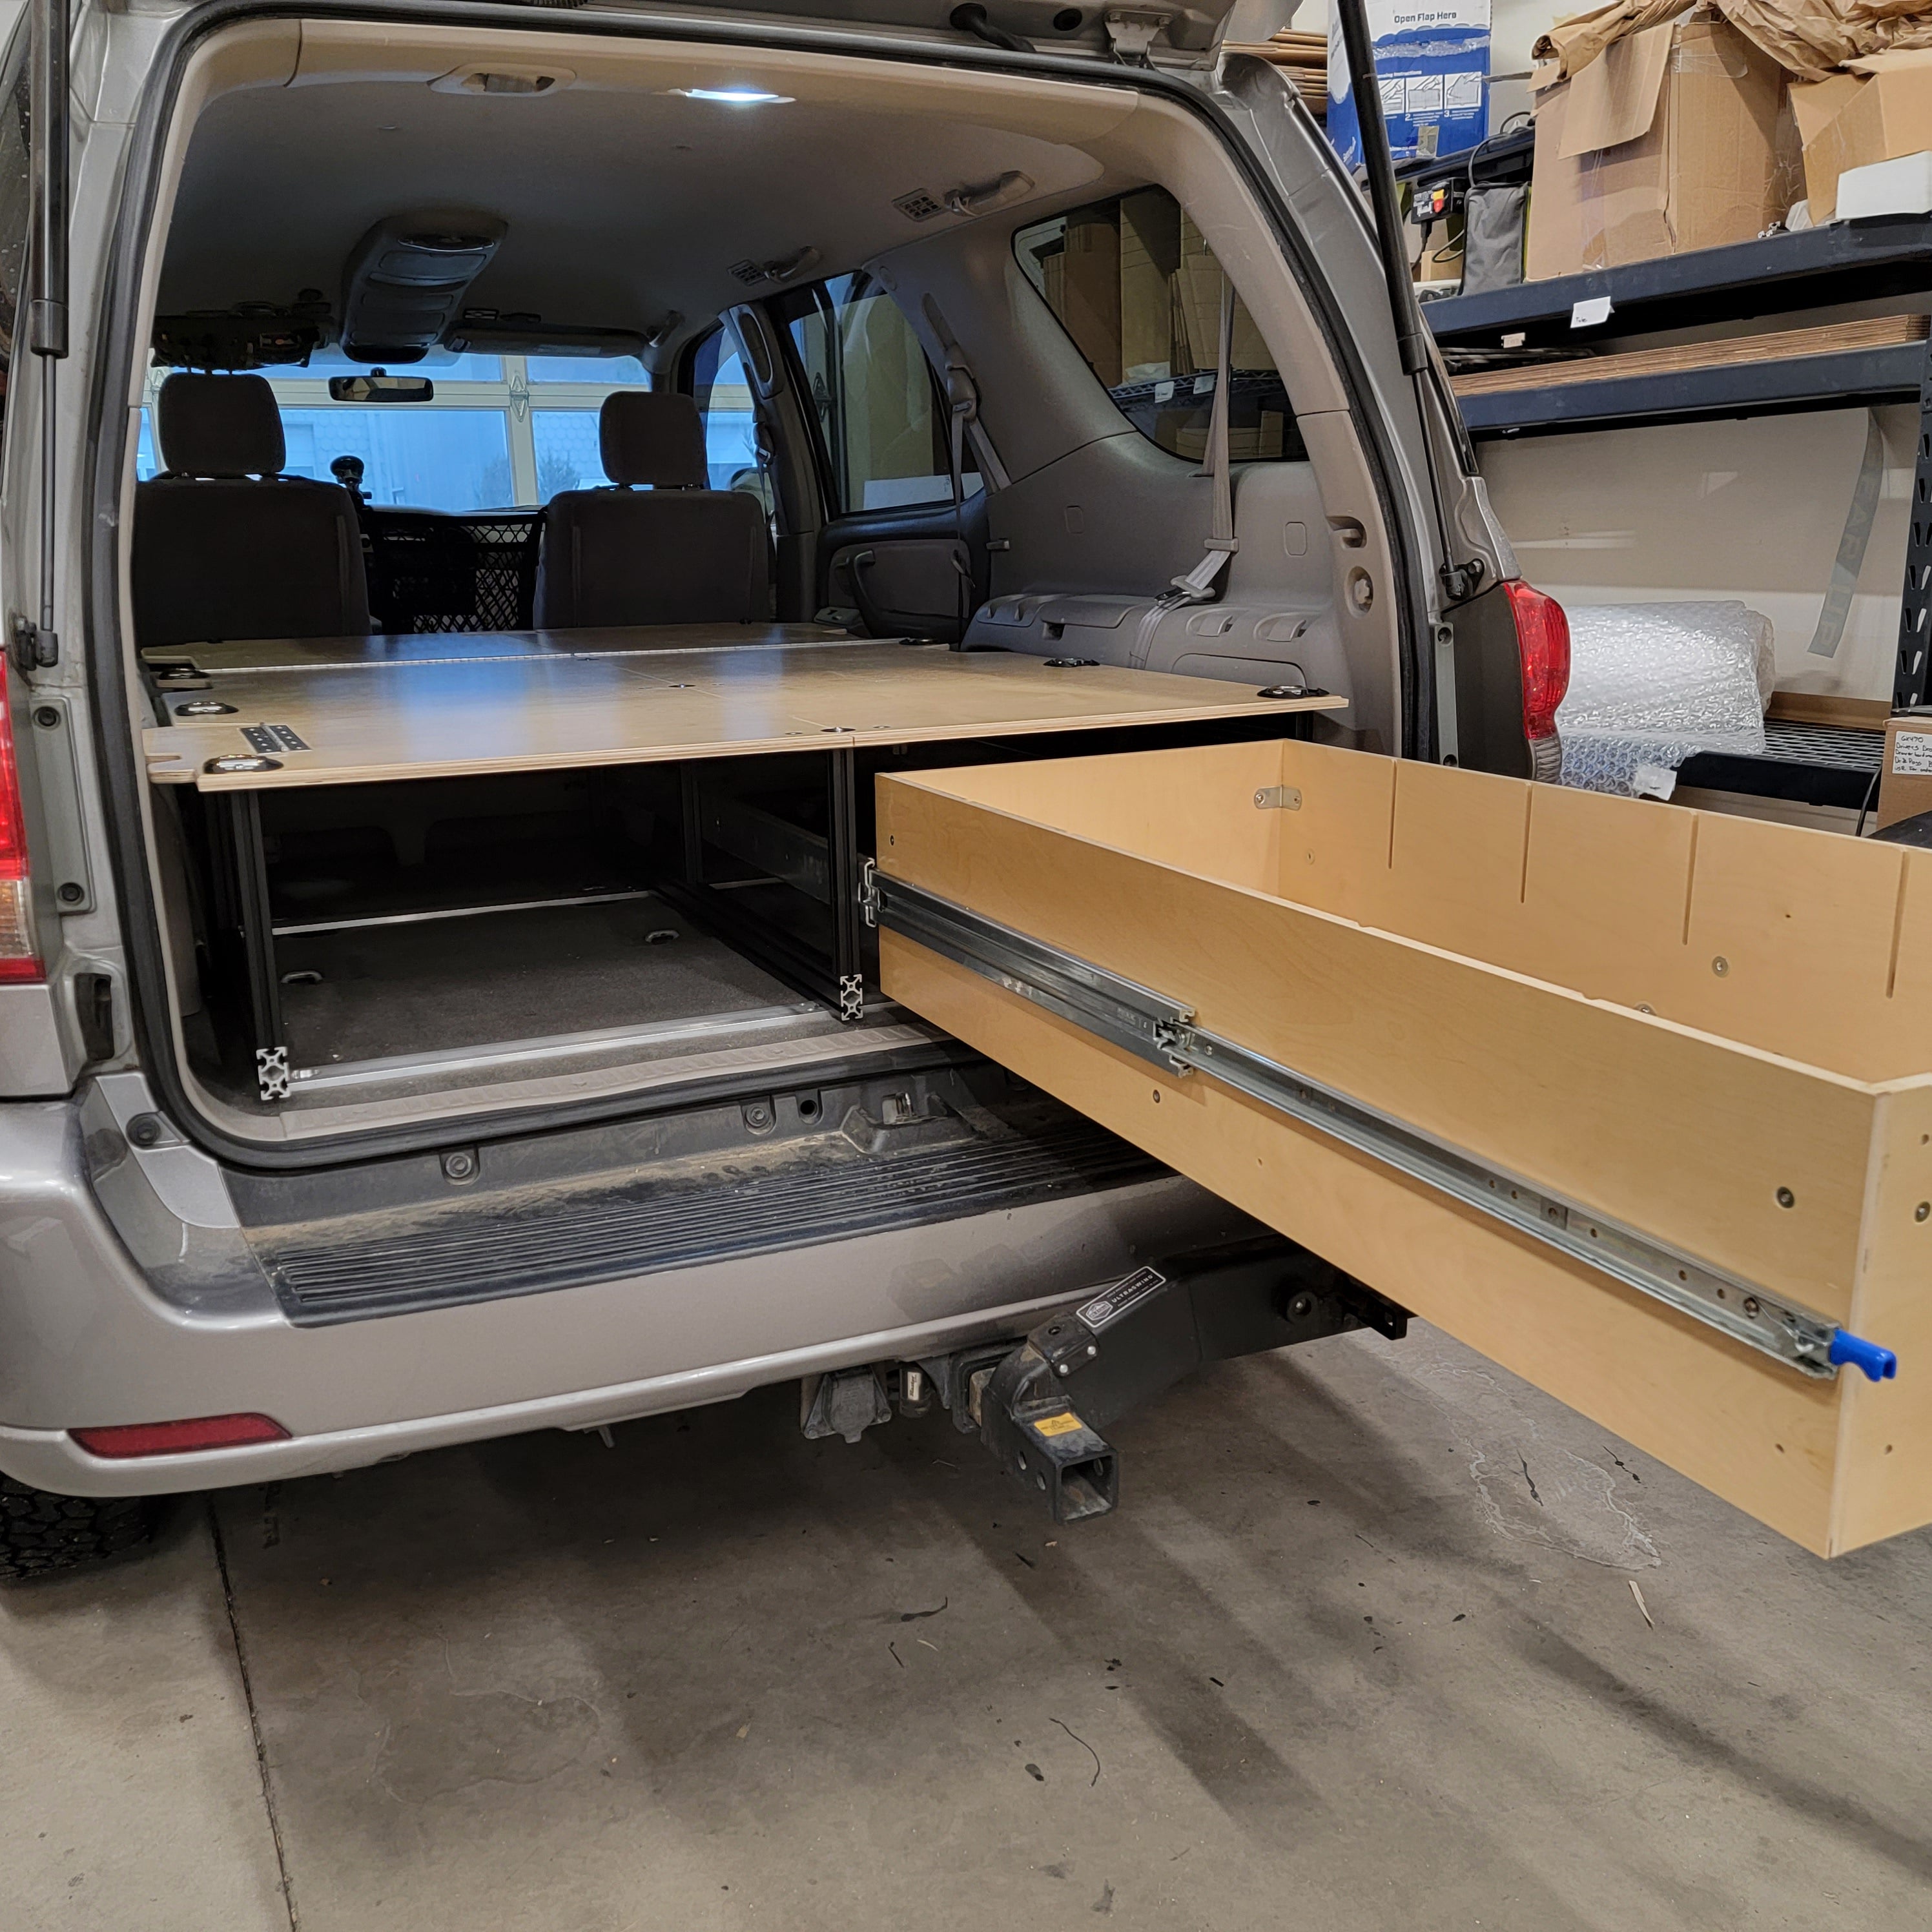 Toyota Sequoia drawer system with sleeping platform for vehicle organization